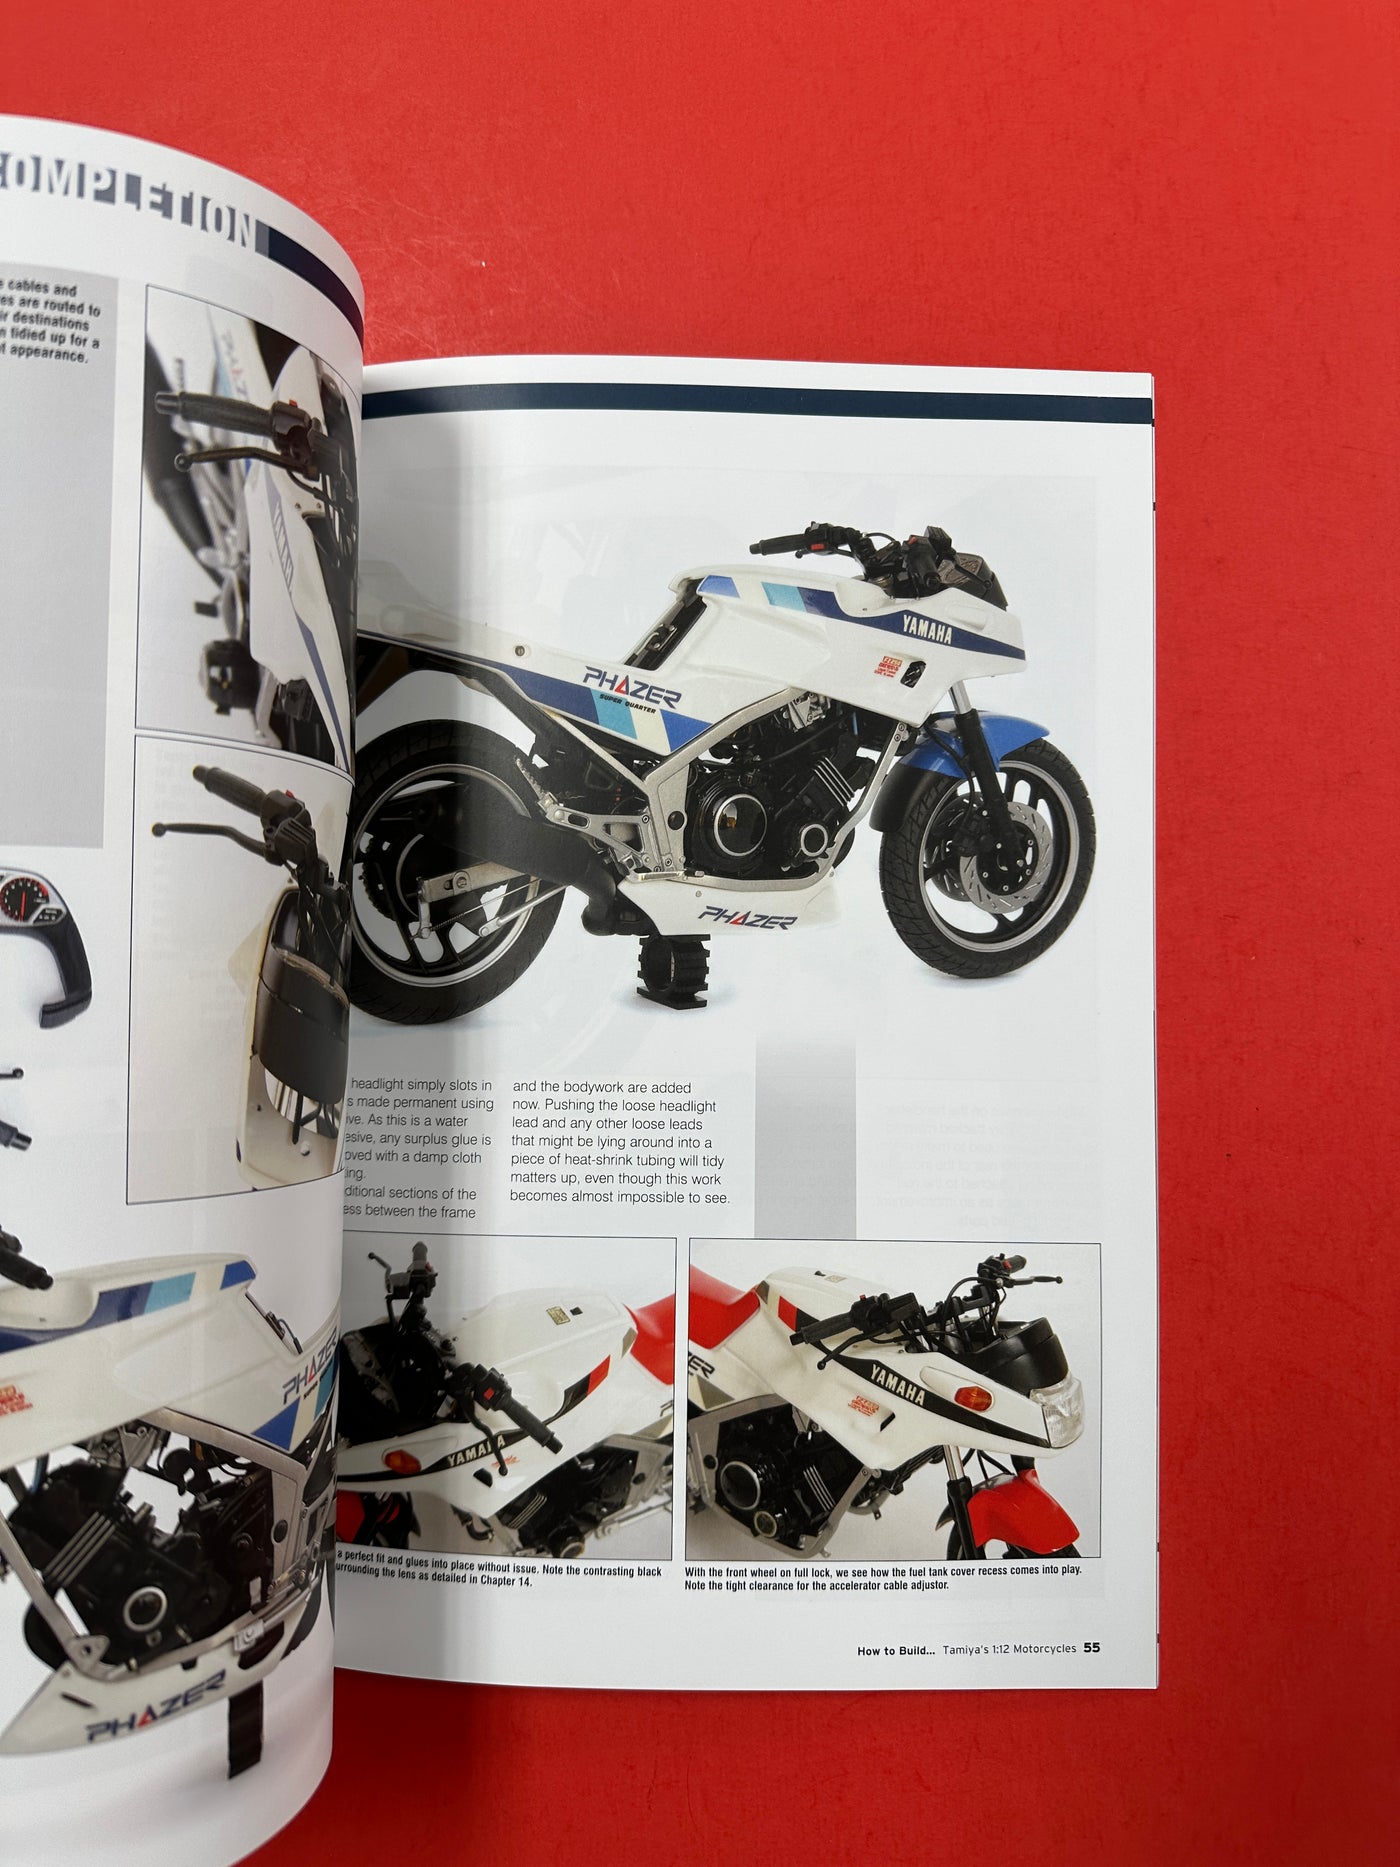 How to build Tamiya’s 1:12 Motorcycles